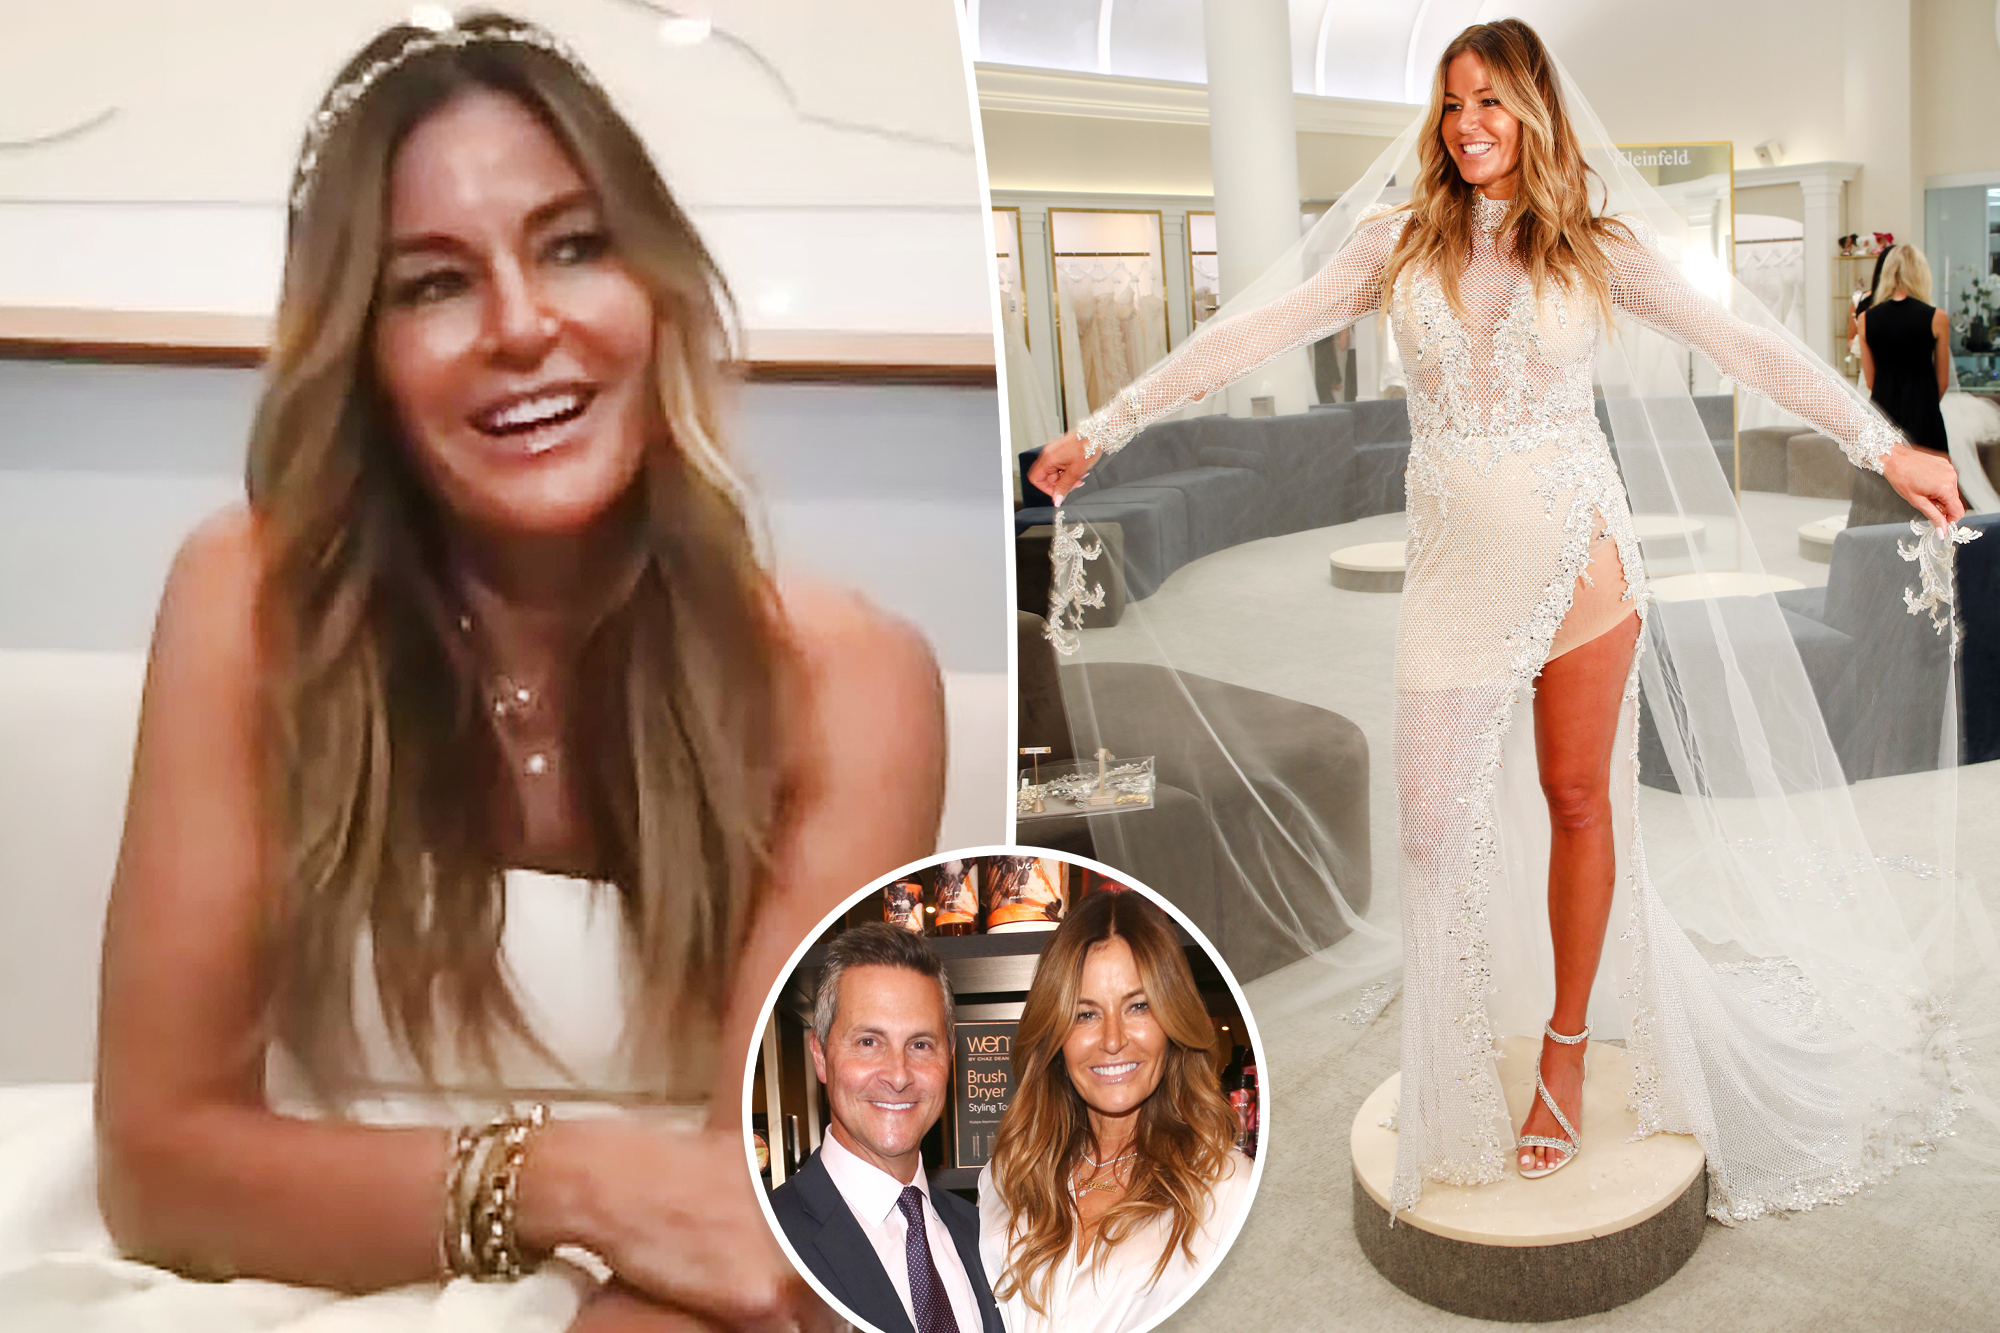 Inside Kelly Bensimon’s emotional wedding dress fitting at 56: ‘Never thought this would happen’